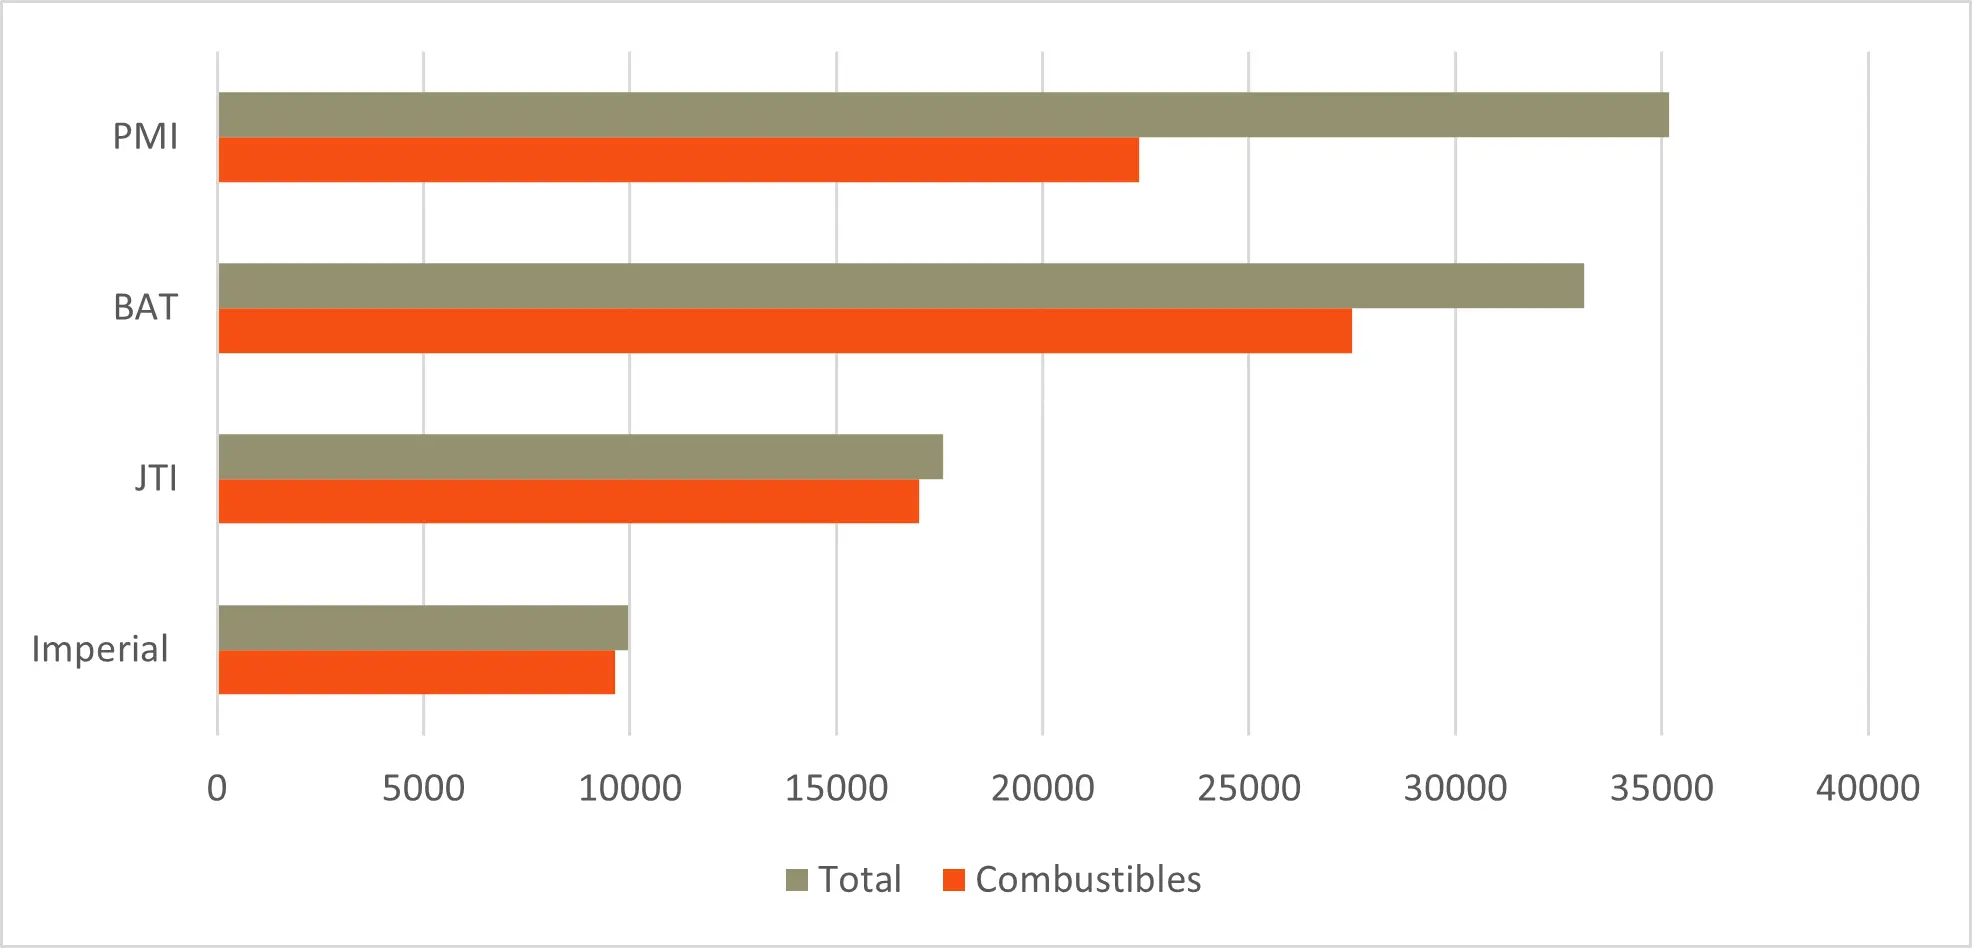 A bar graph showing the total revenues each of the big 4 and the proportion from the sale of combustibles